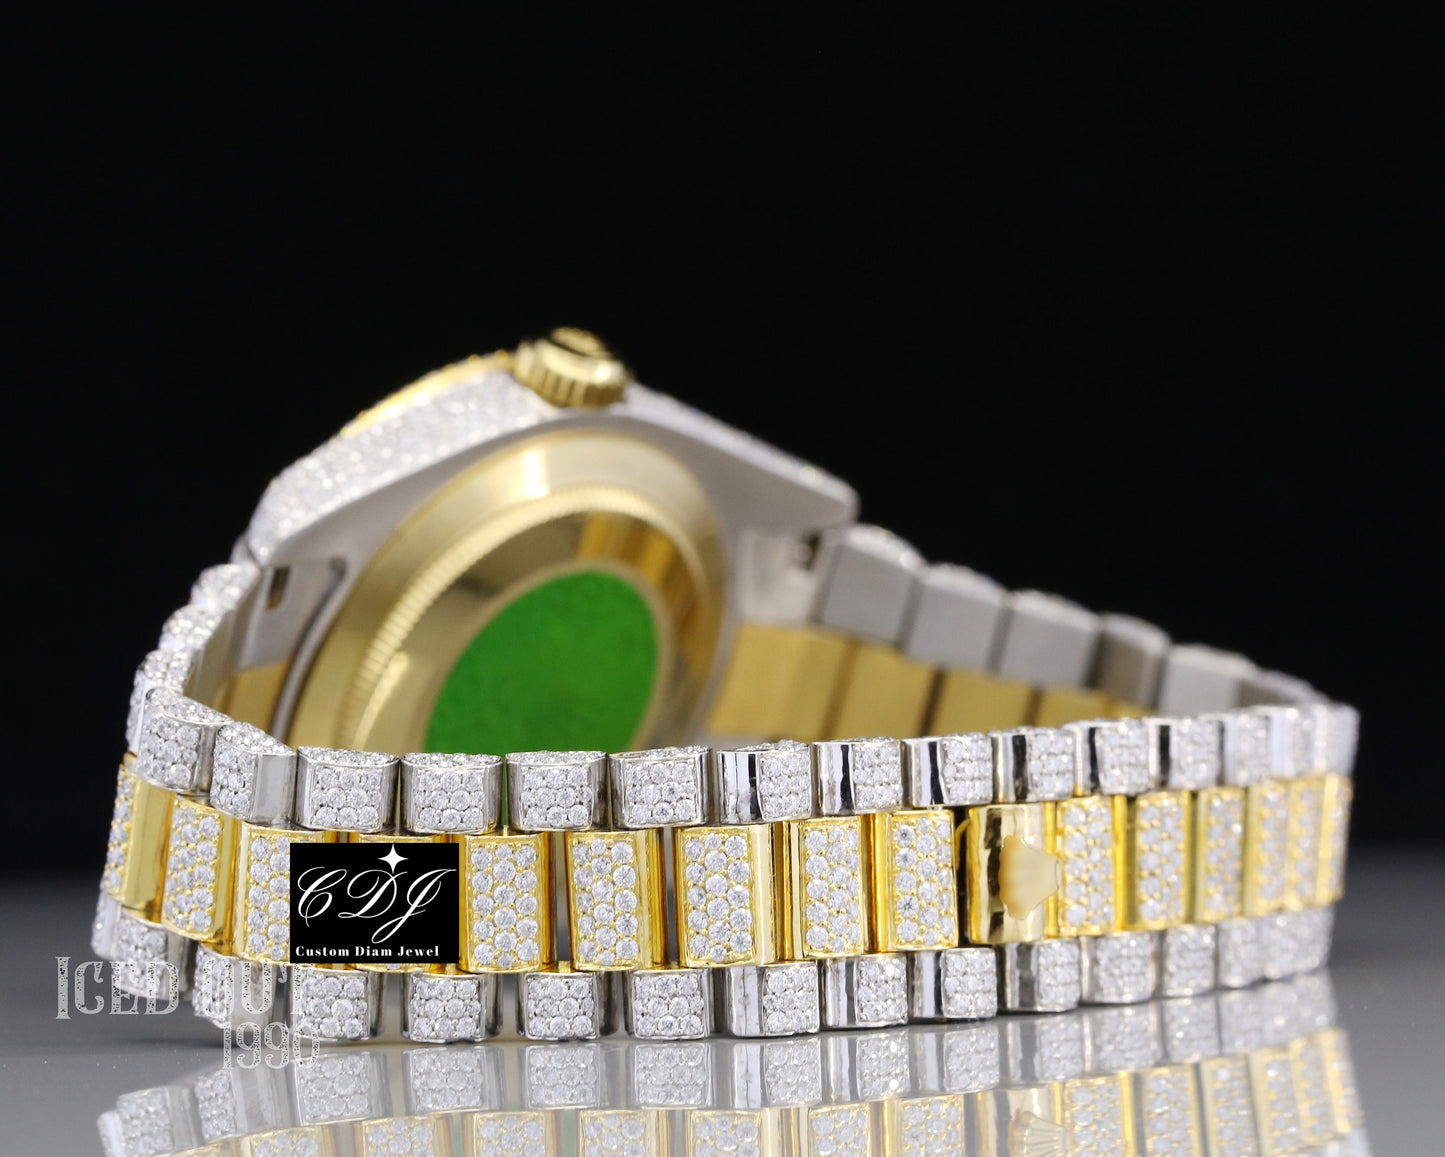 Luxury Rolex Watches For Men Natural Diamond Two Tone Watch Fully Iced Out Wrist Watches